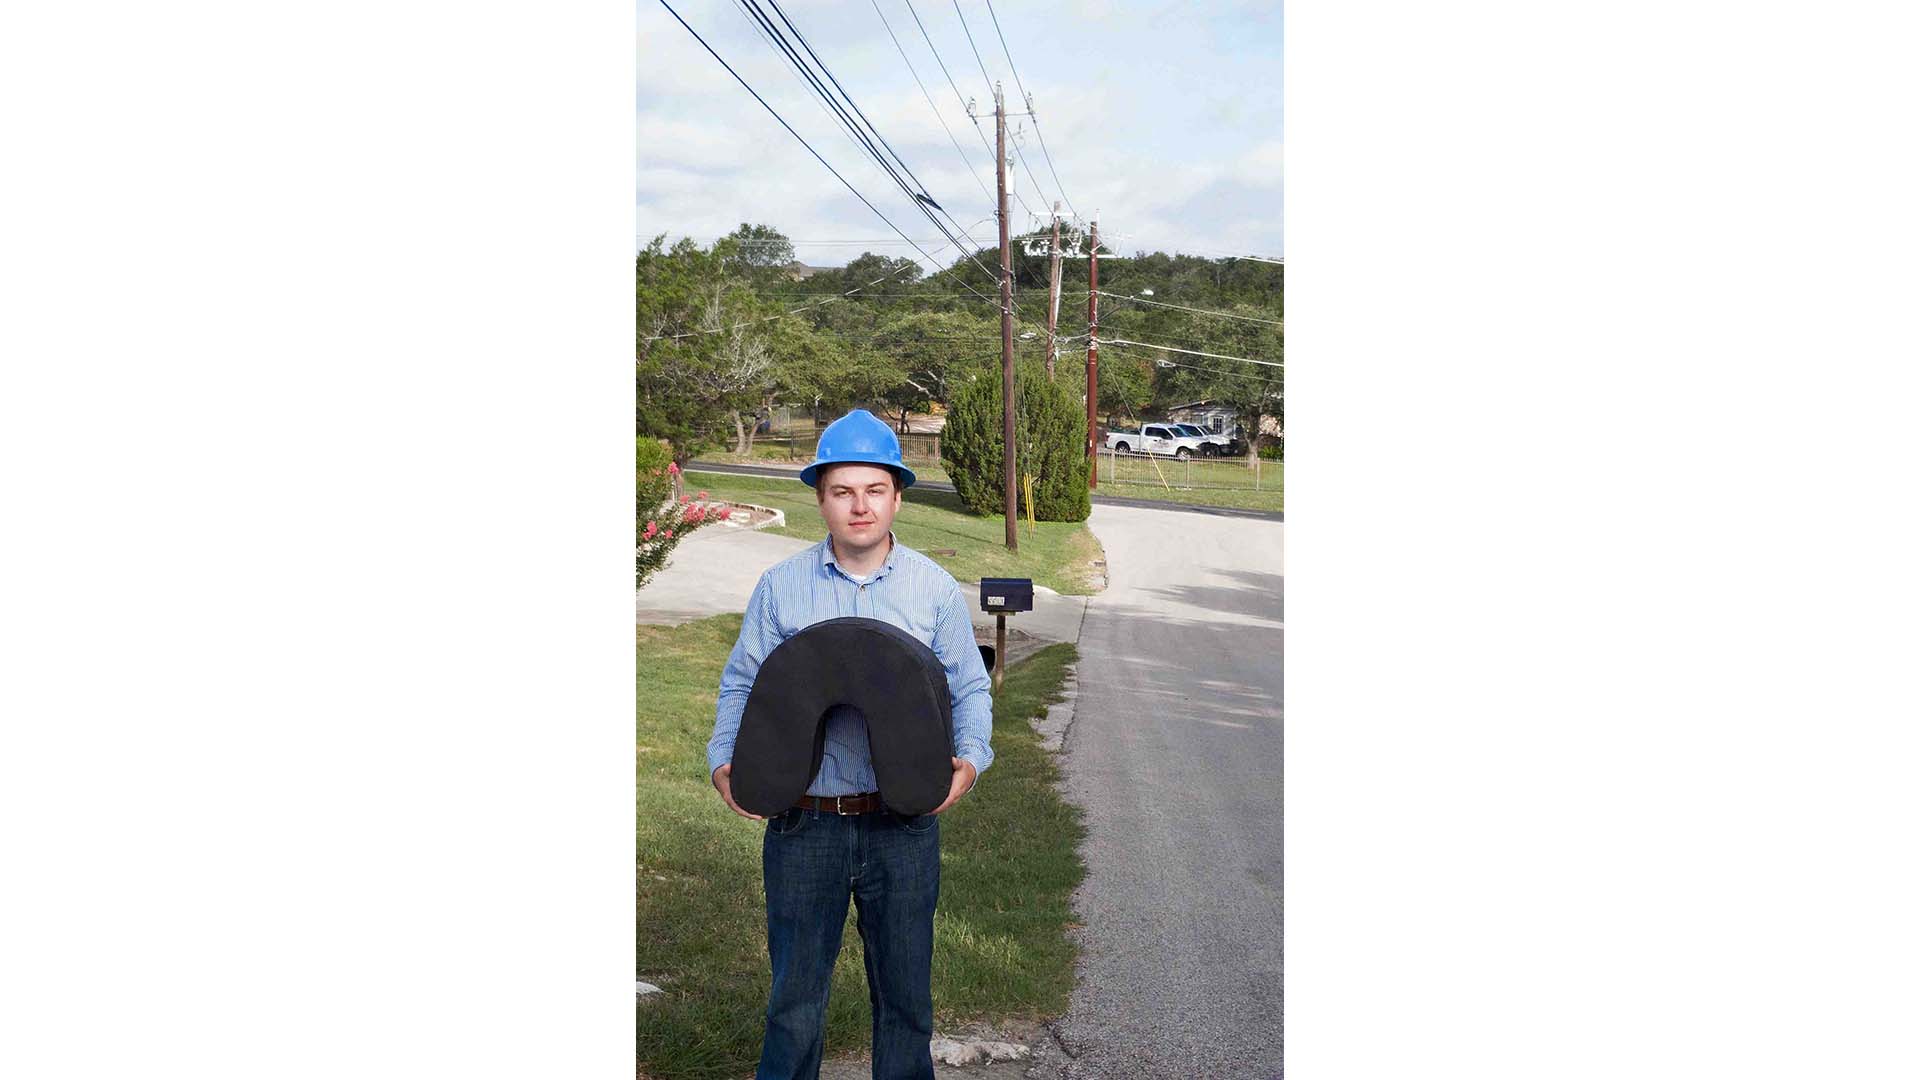 An engineer holds the custom spool-free cable coil used for aerial fiber deployment